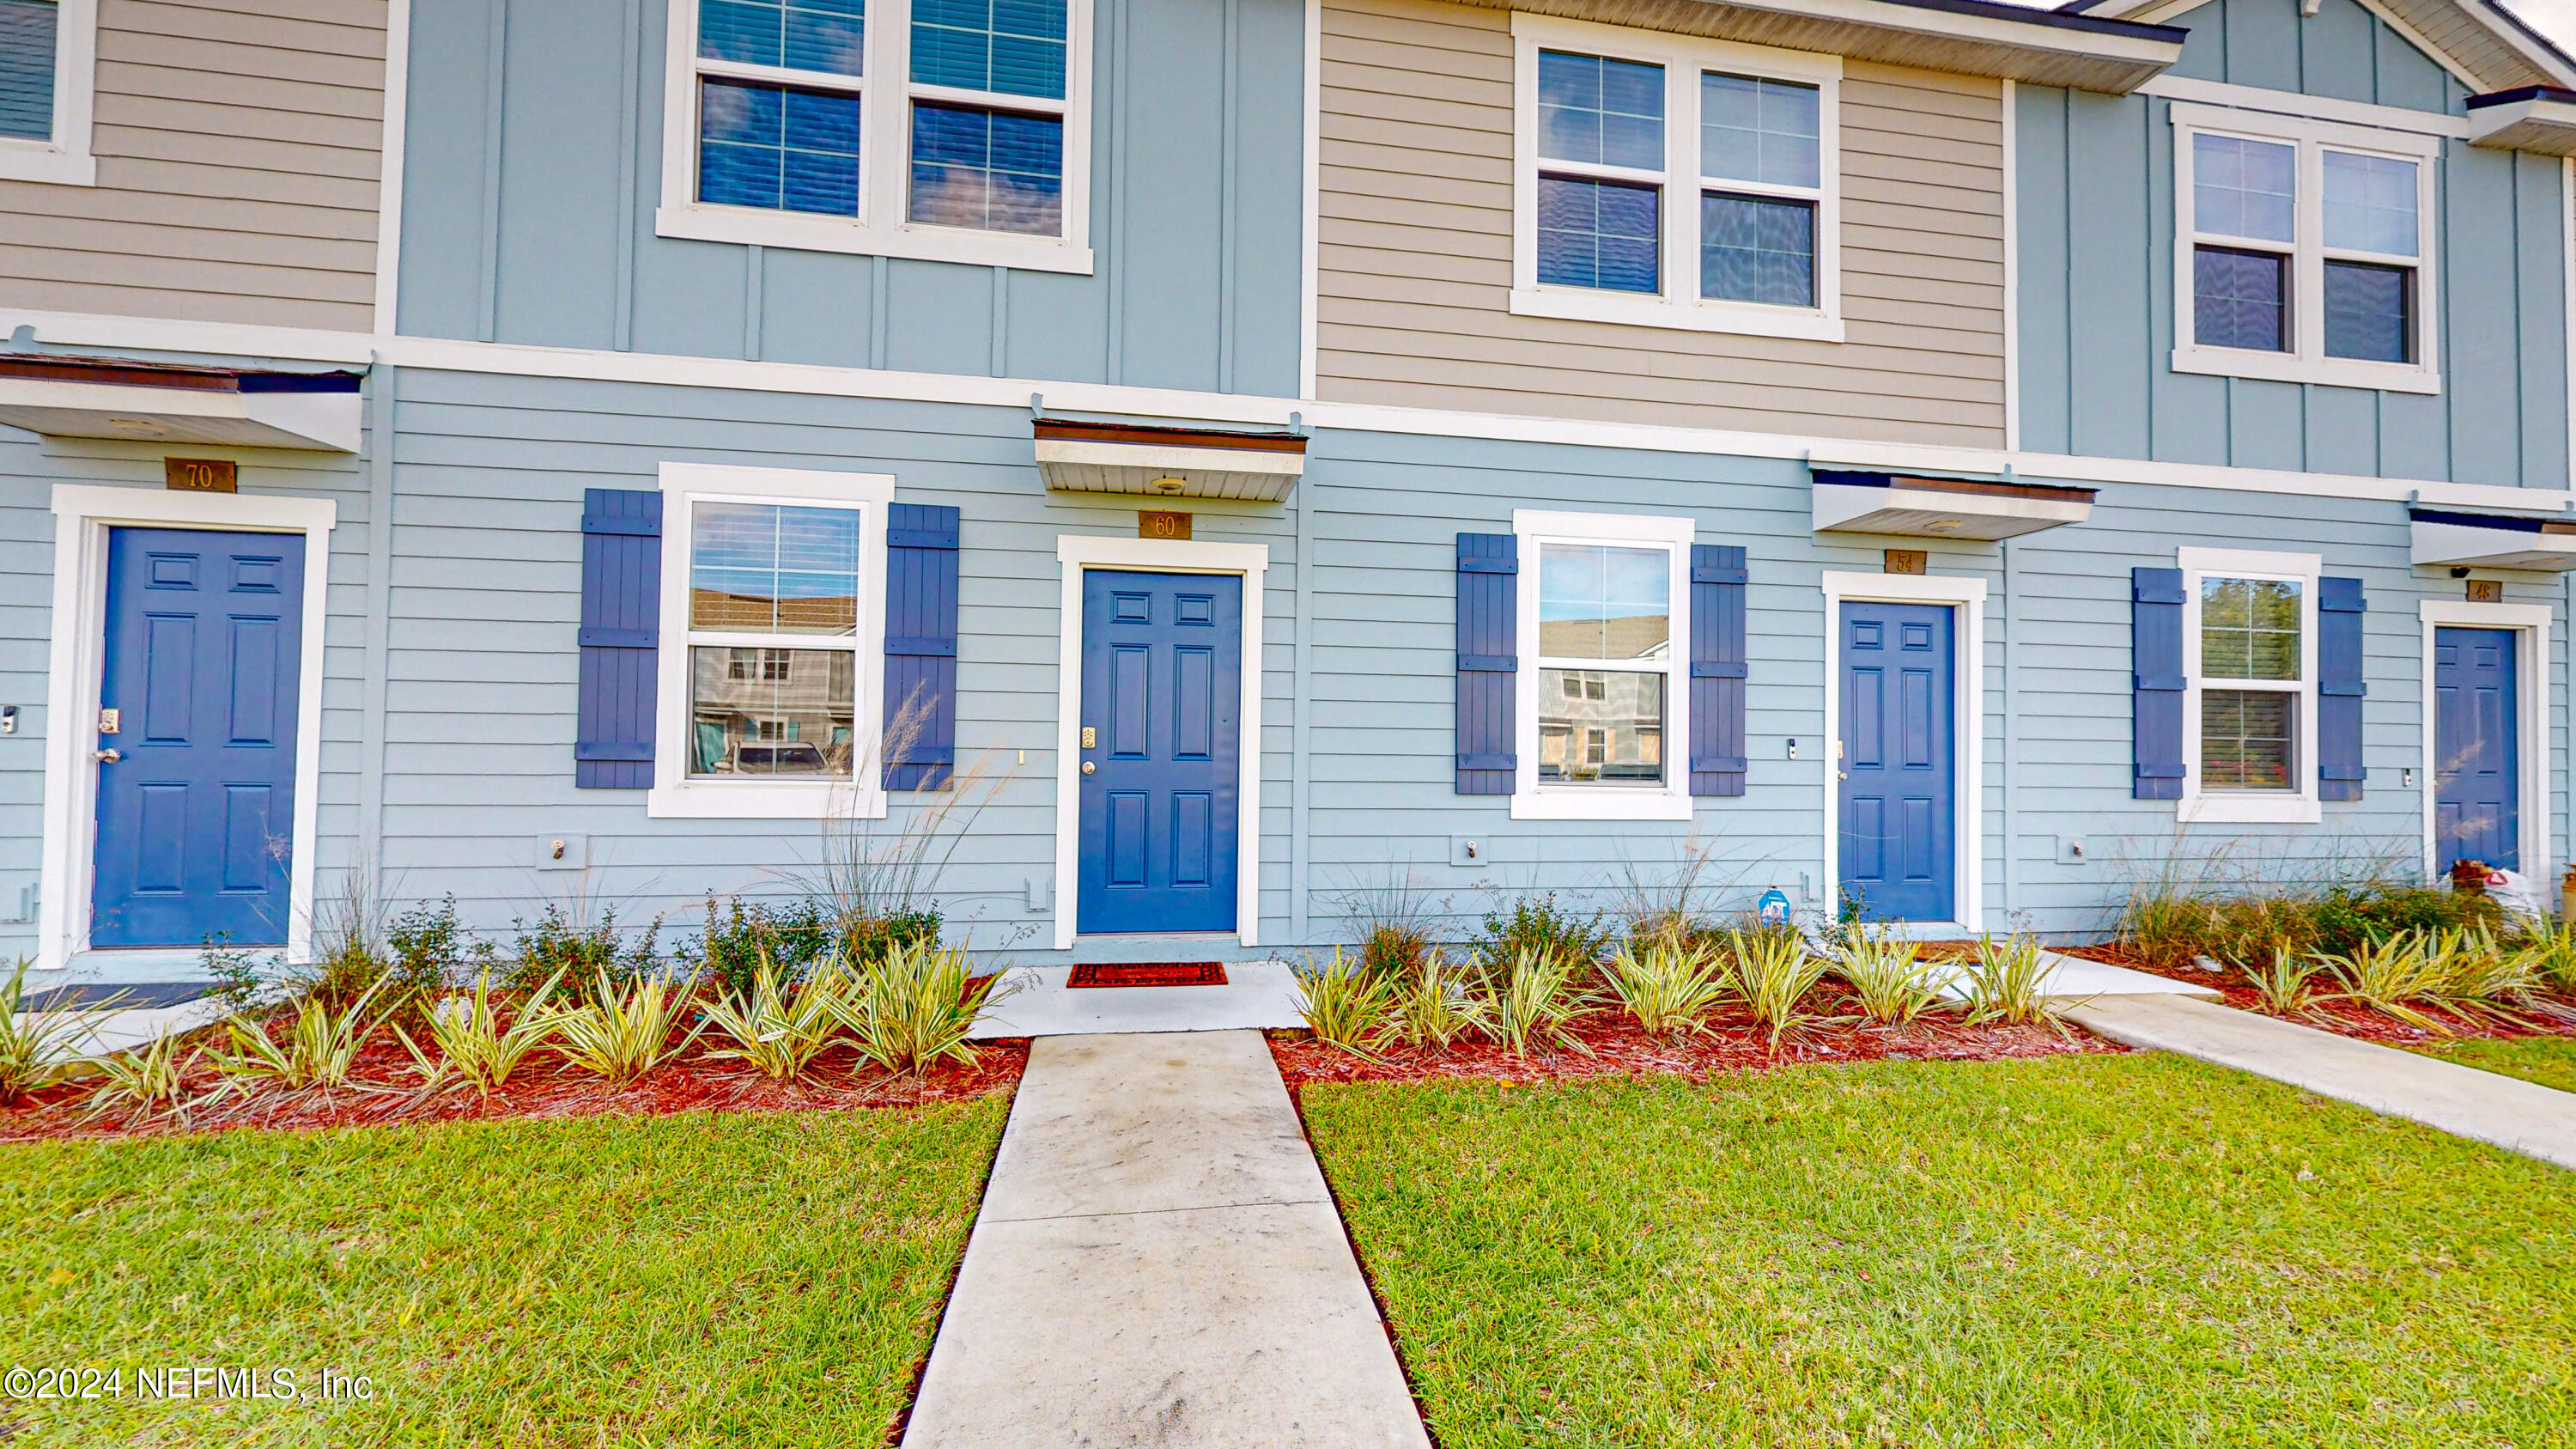 View St Augustine, FL 32084 townhome